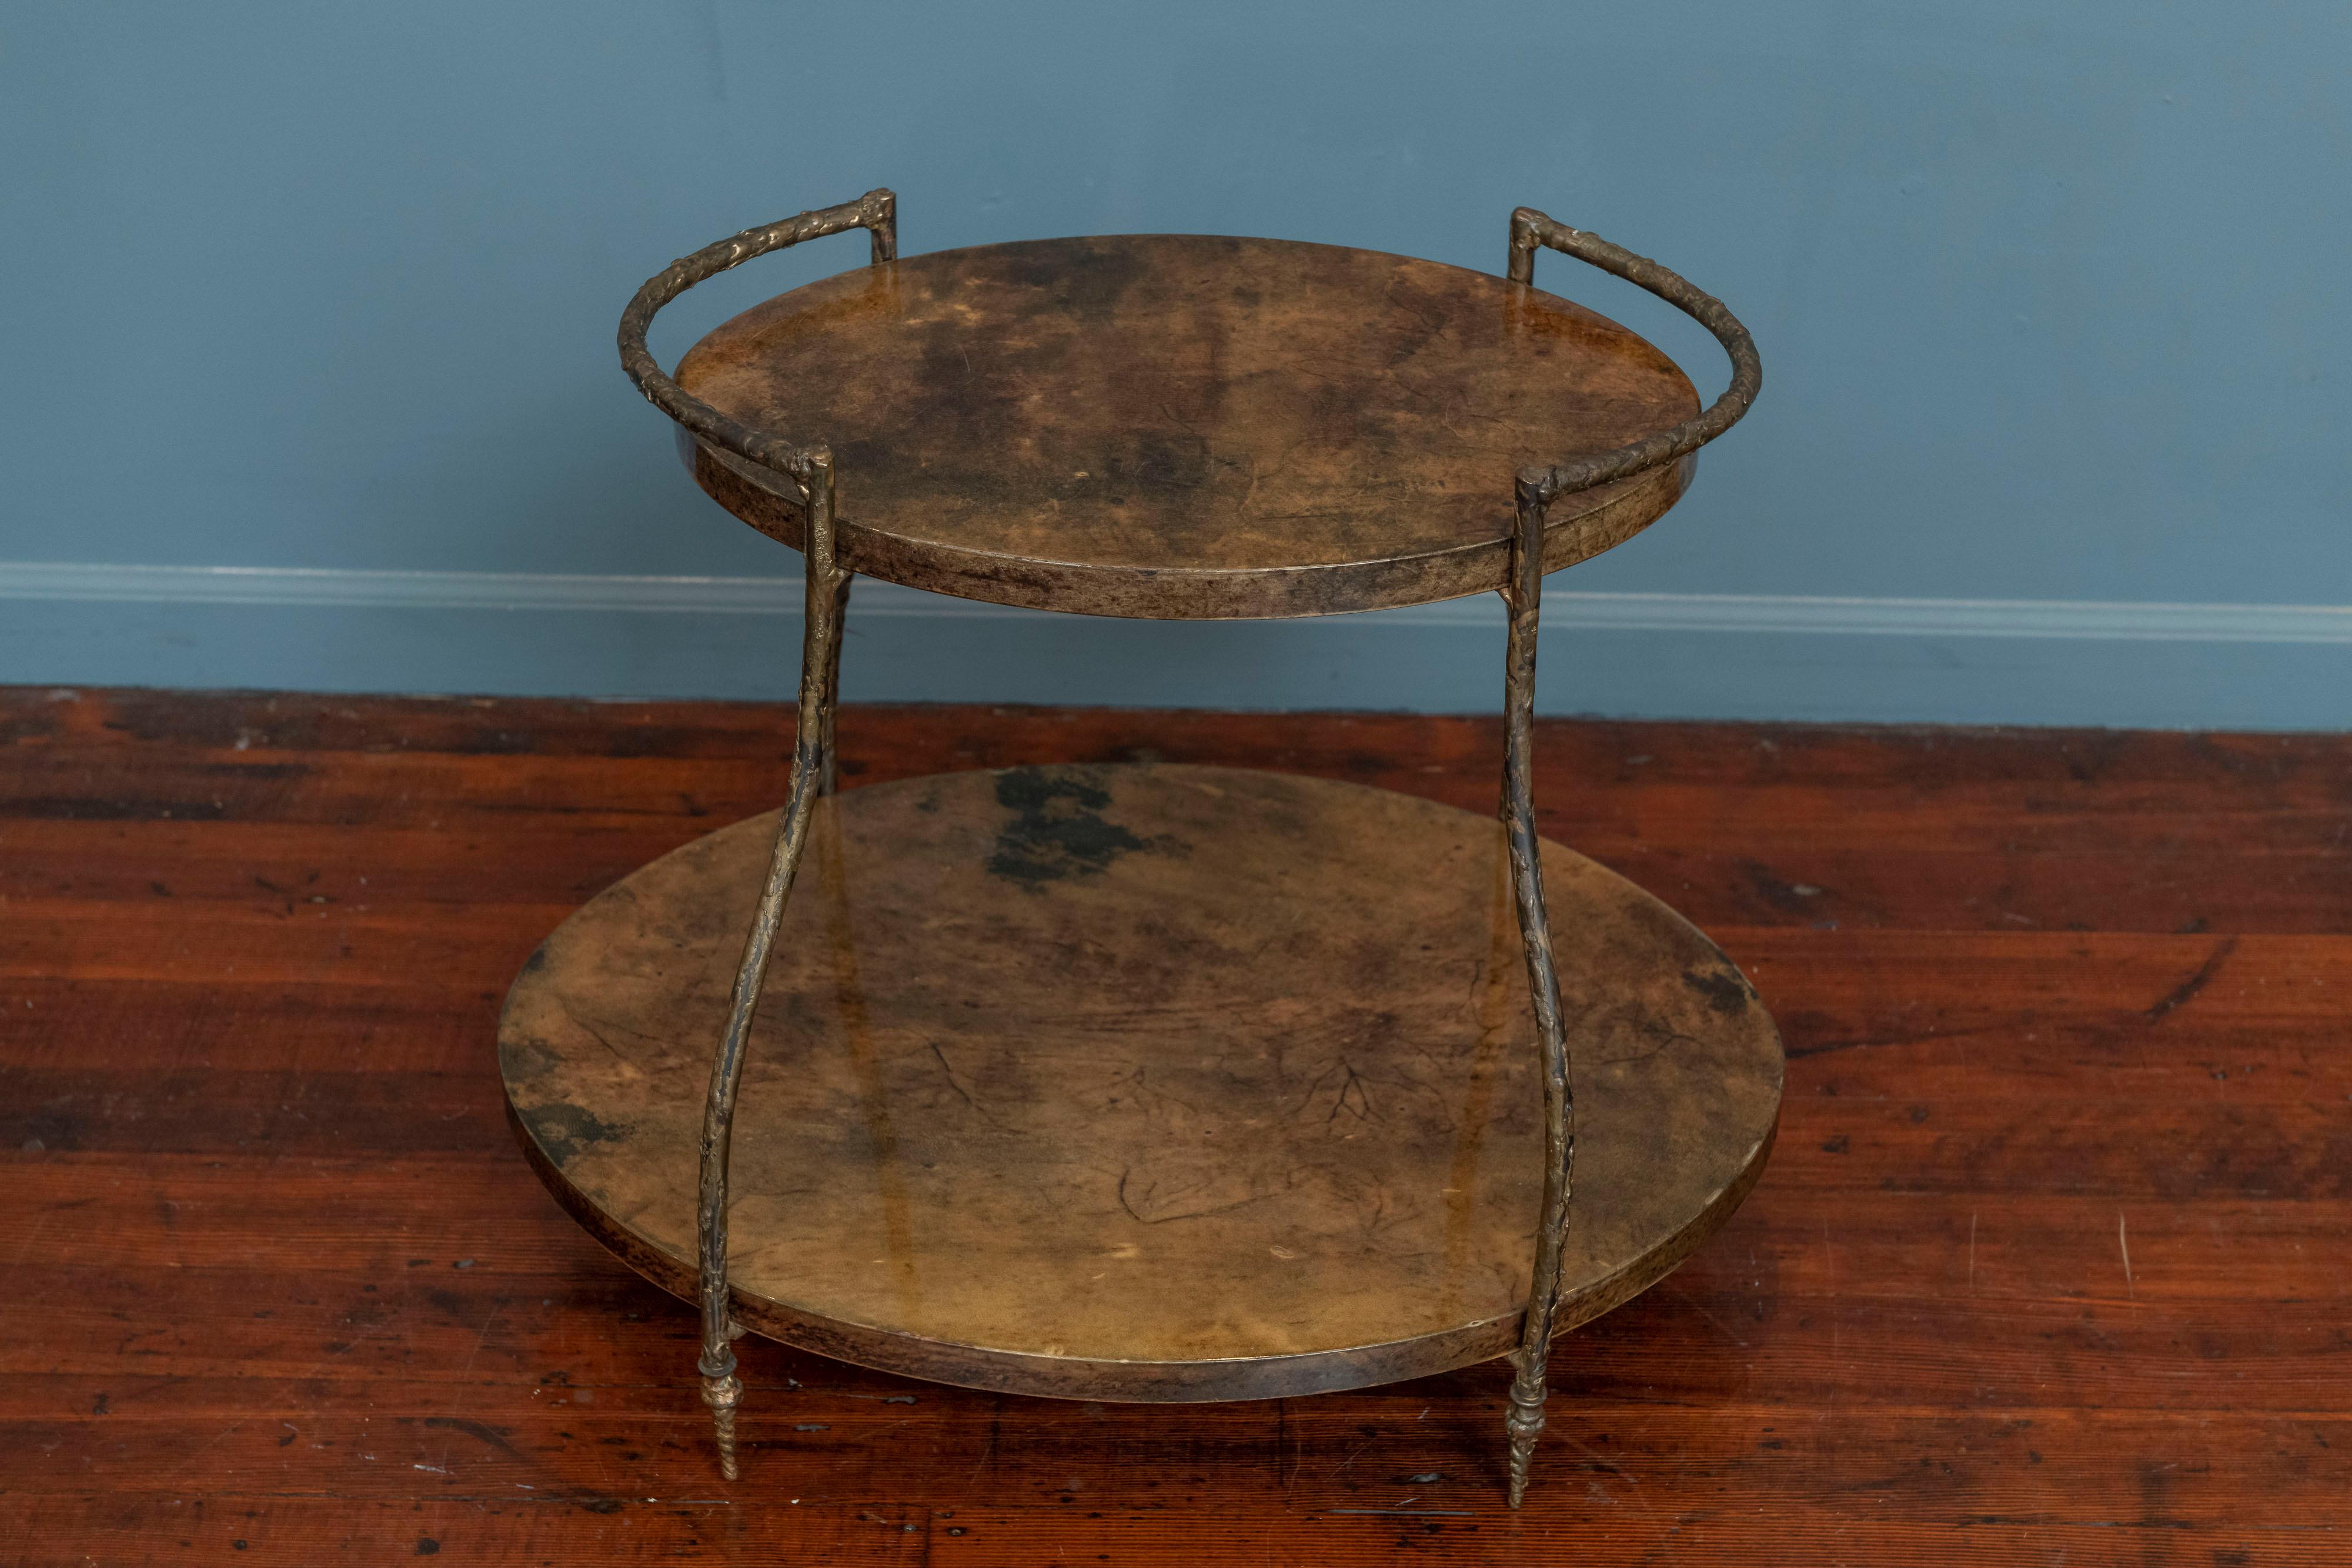 Aldo Tura bar cart or drinks table made from faux marbleized goatskin wrapped wooden oval tops with an unusual prickly bronze finish frame, labeled. Rare design win very good original condition with one small chip to edge of lower shelf.